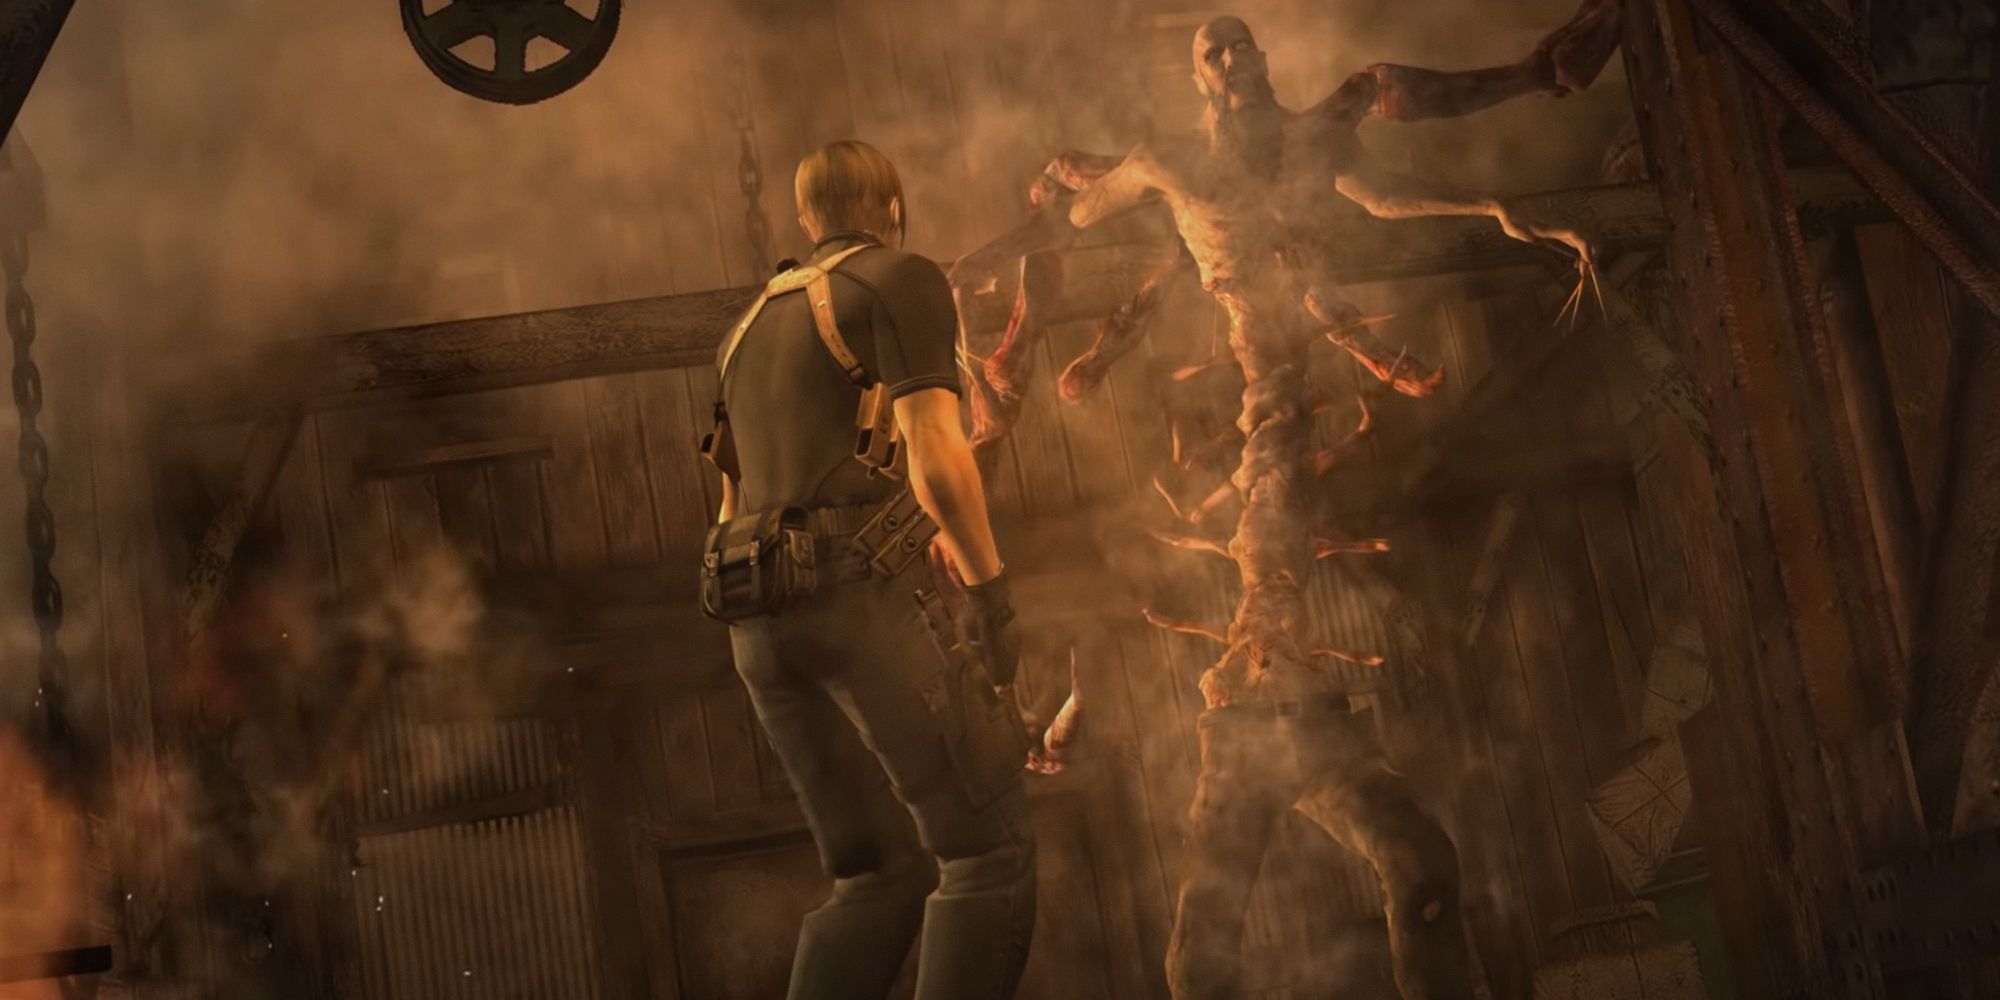 Resident Evil 4 Bitores Mendez. Leon looking up at a large looming figure with its ribs exposed and long arms sprawling out.